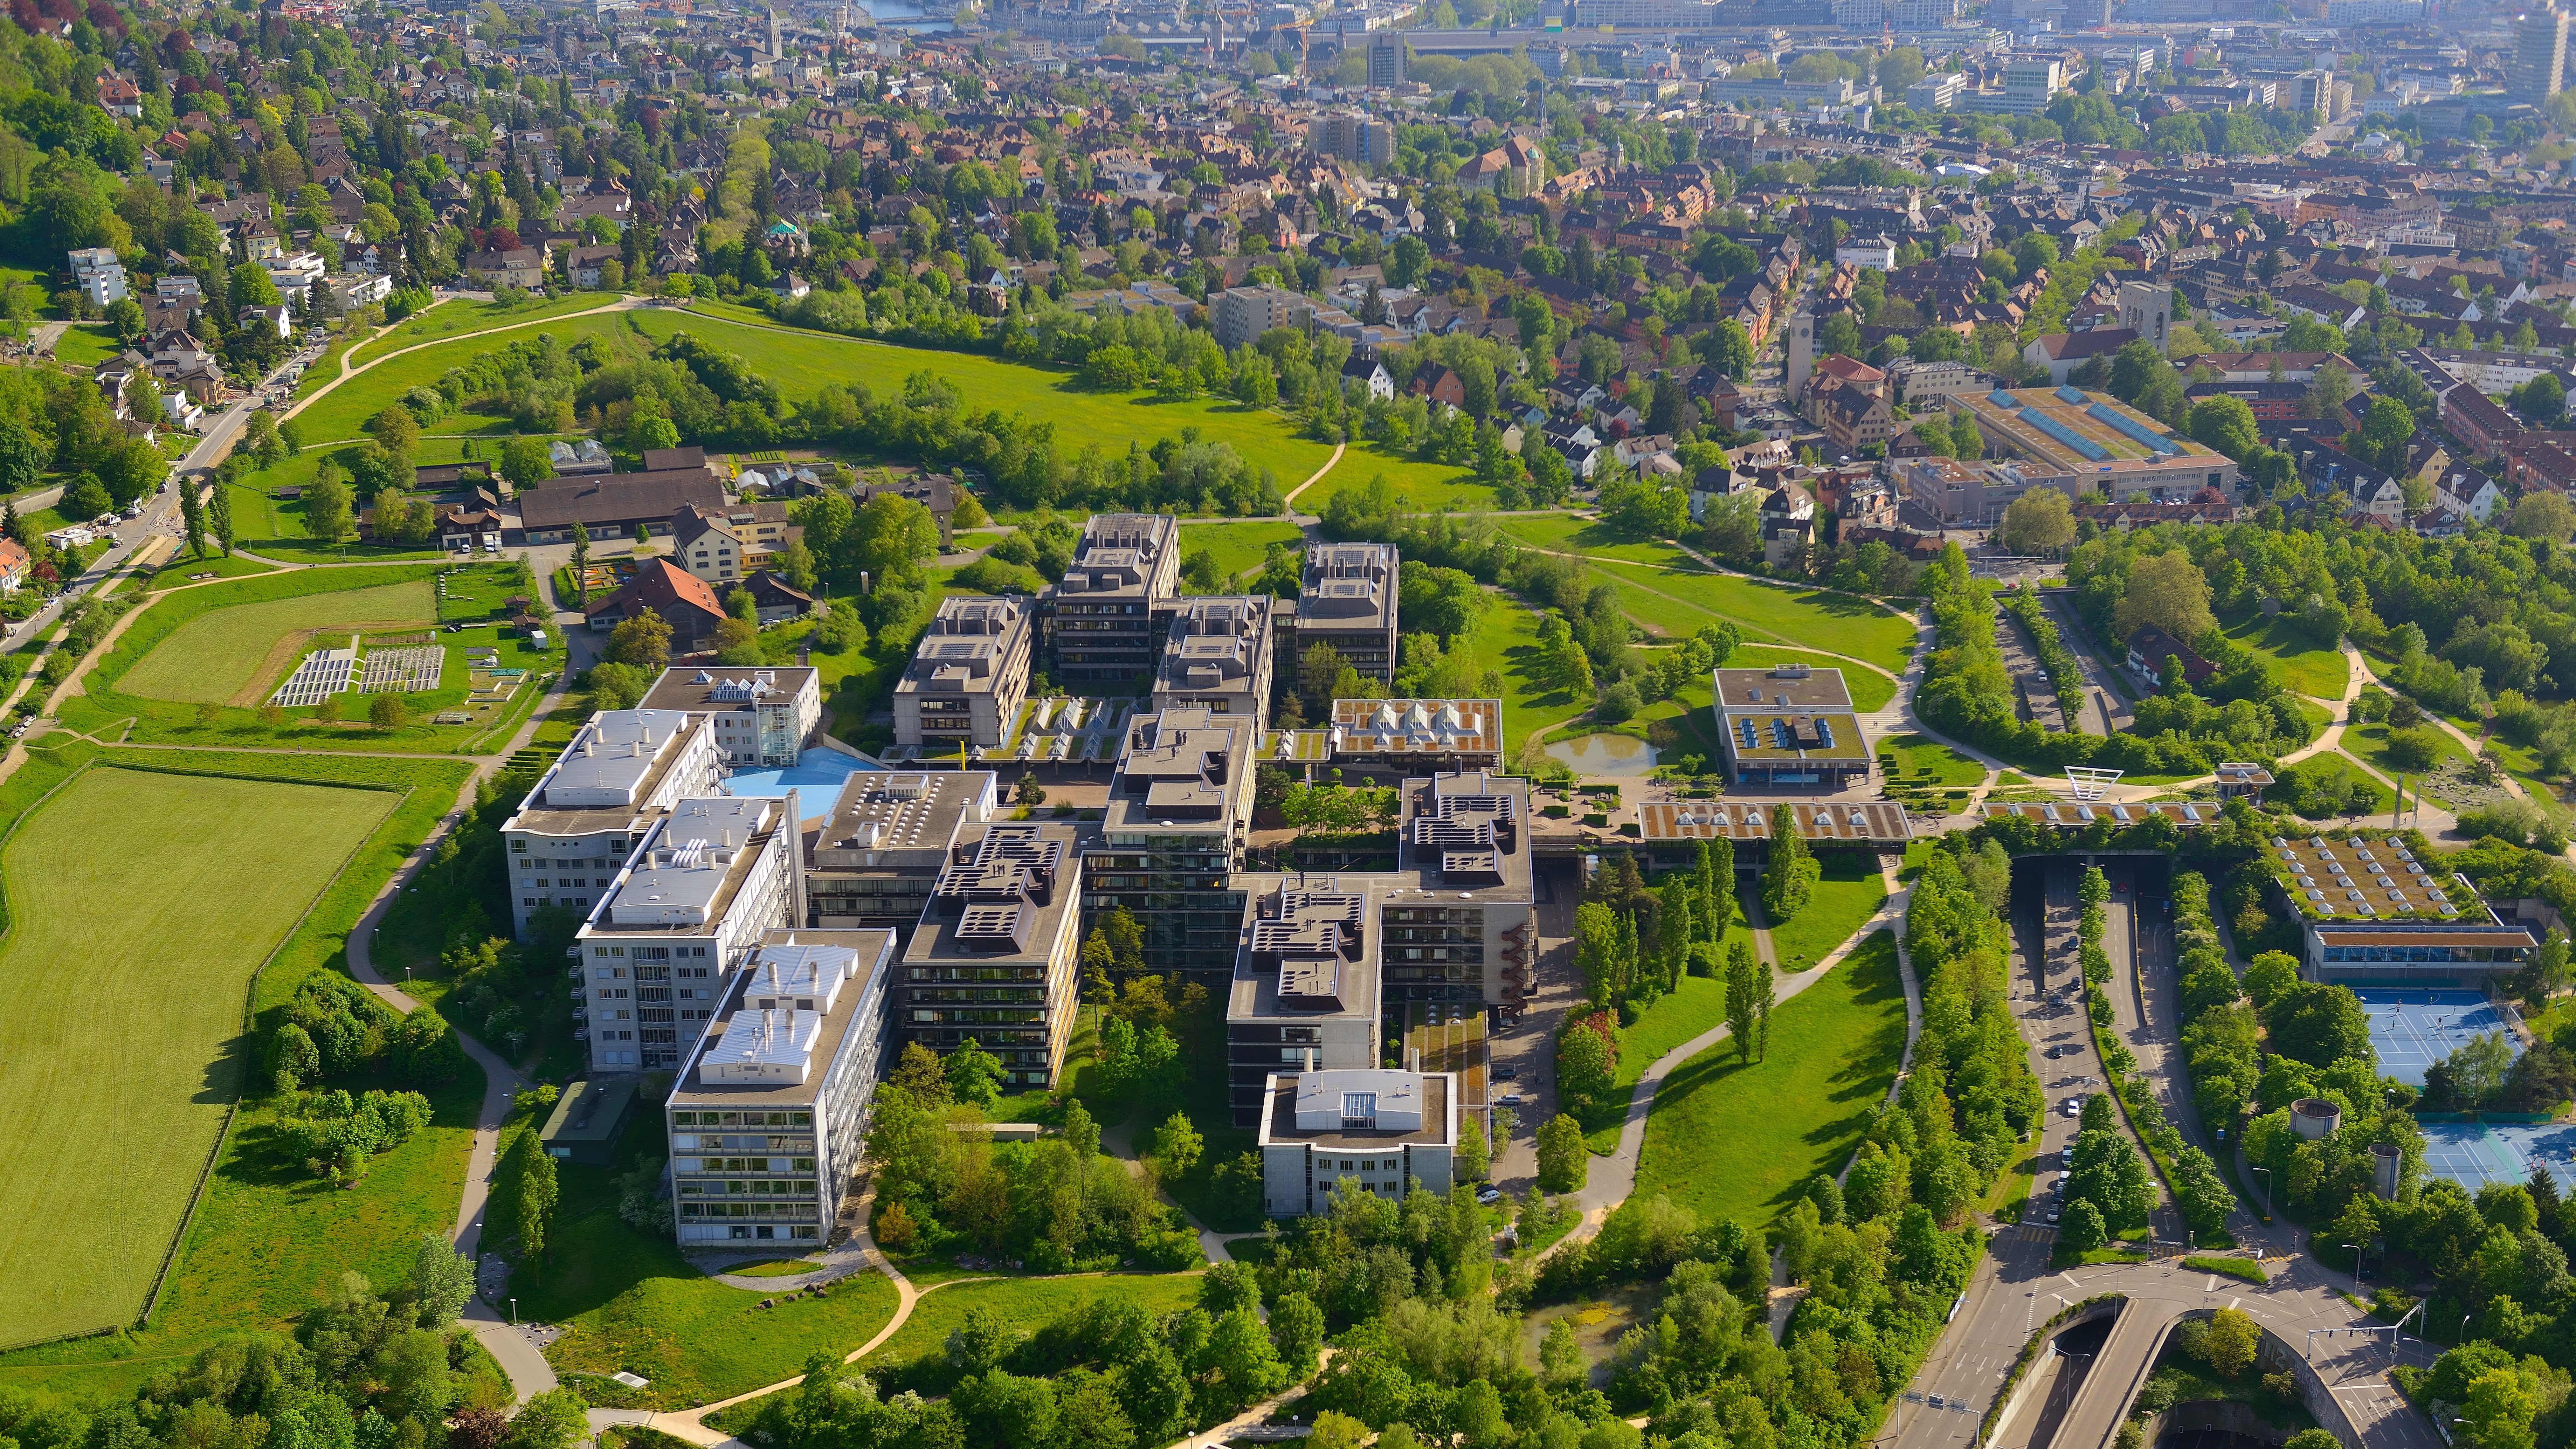 Irchel Campus from above